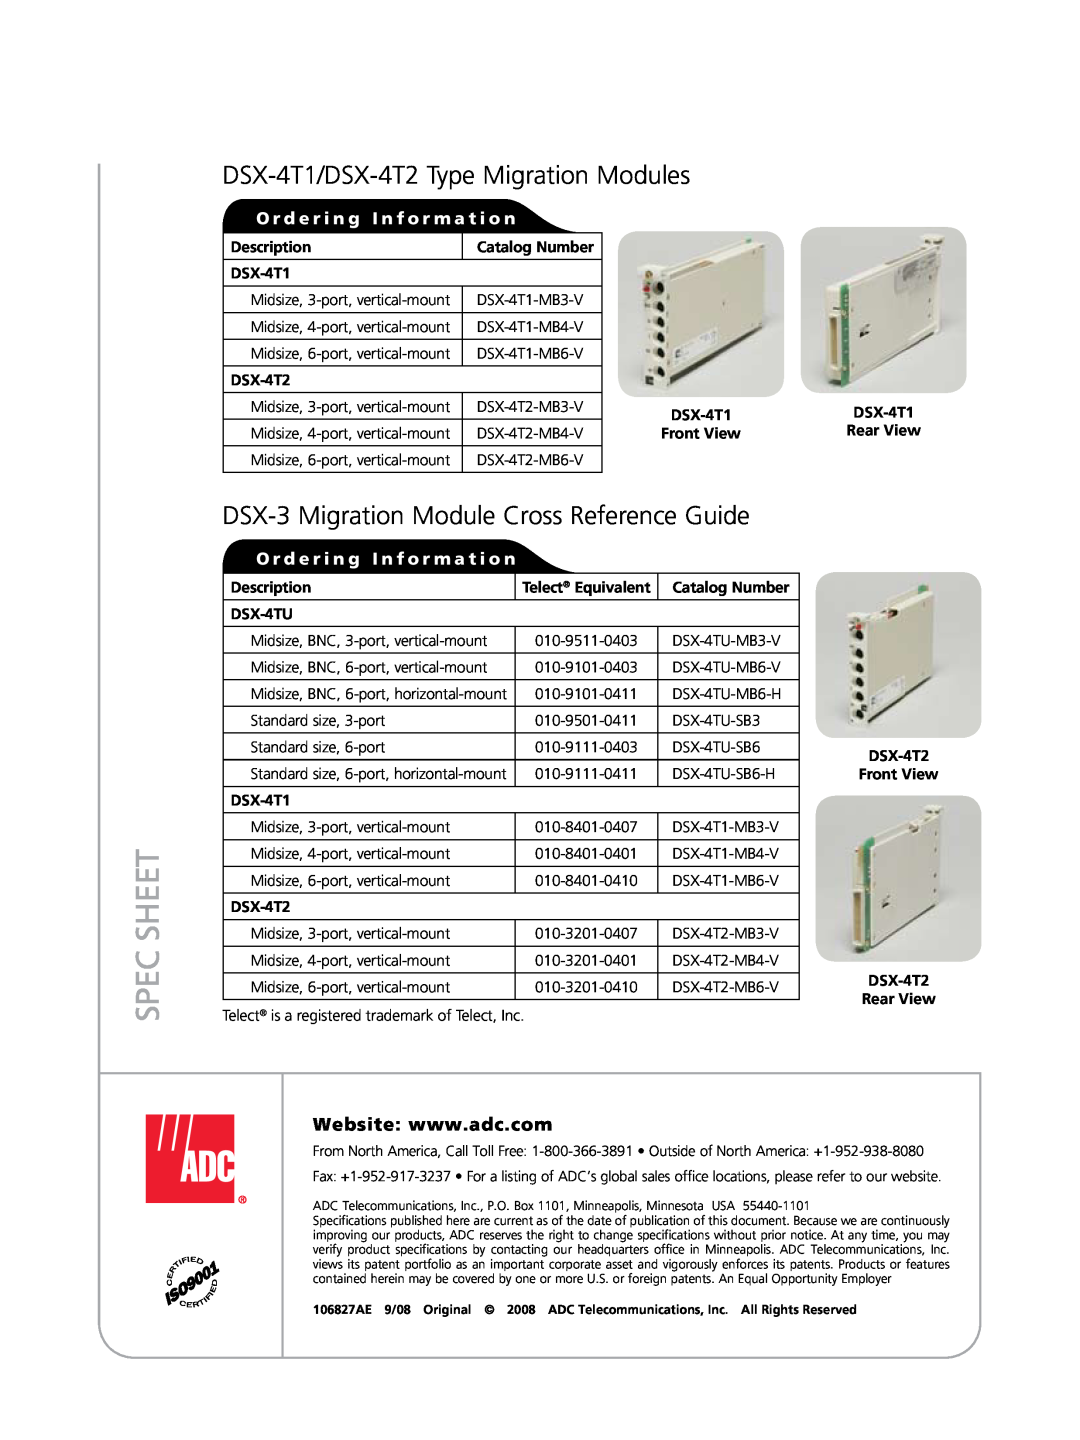 ADC manual DSX-4T1/DSX-4T2 Type Migration Modules, DSX-3 Migration Module Cross Reference Guide, Spec Sheet 